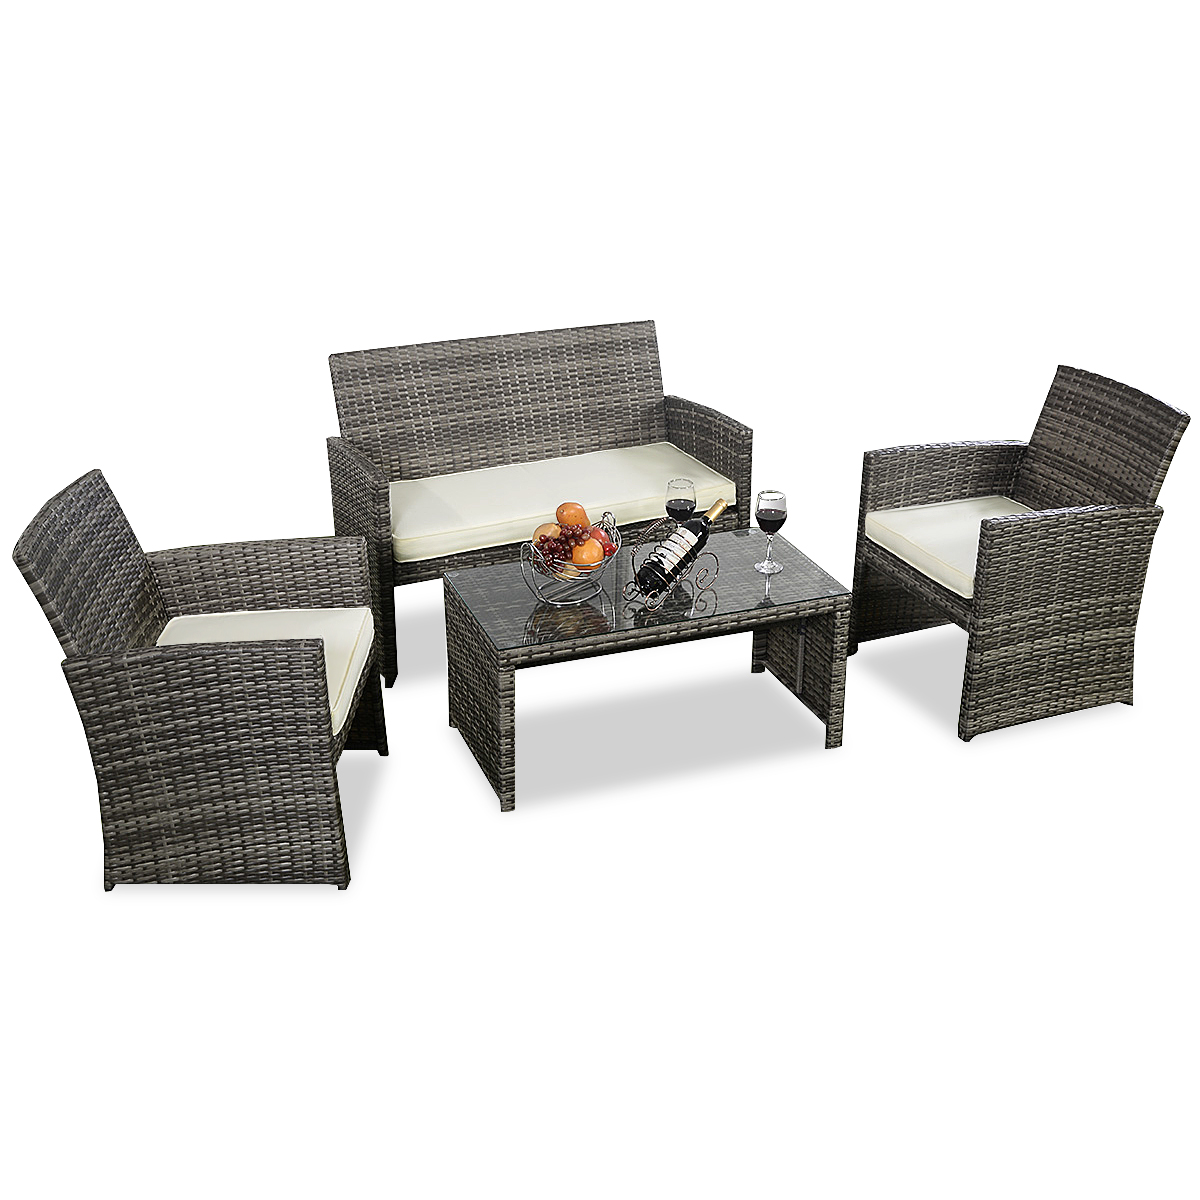 Topbuy 4PCS Outdoor Furniture Set Chairs Coffee Table Patio Garden Set Mix Gray - image 1 of 8